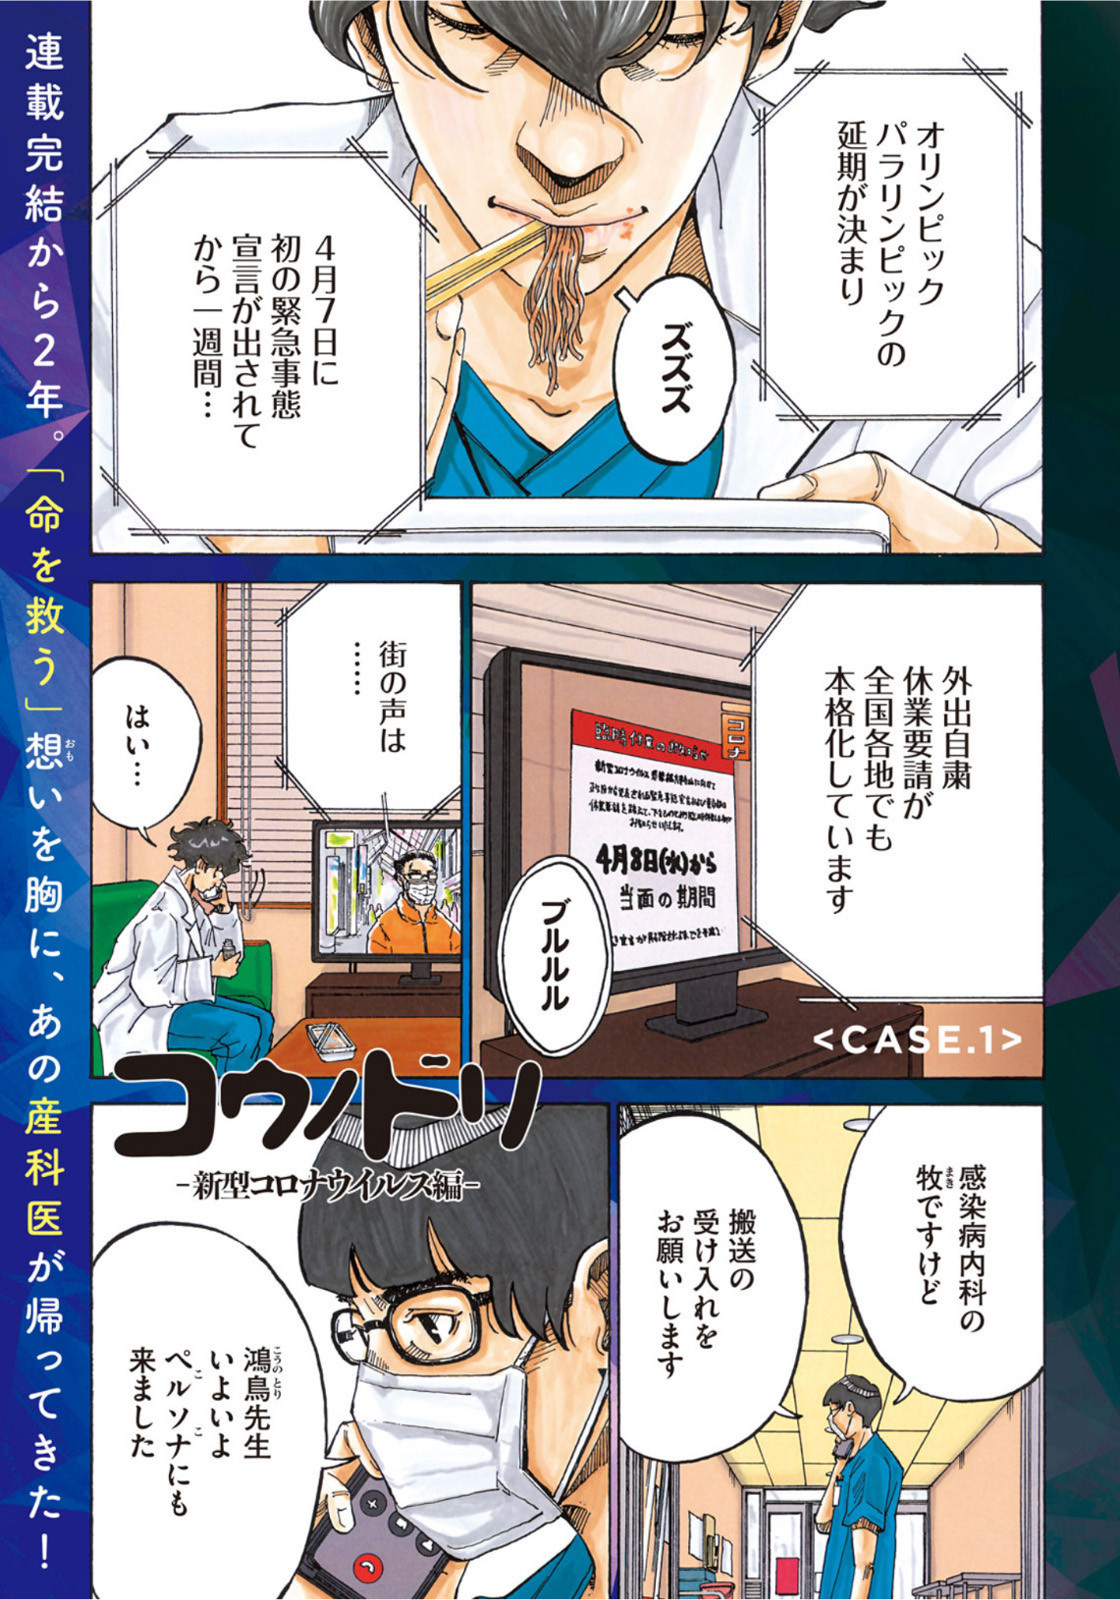 Weekly Morning - 週刊モーニング - Chapter 2022-22-23 - Page 3